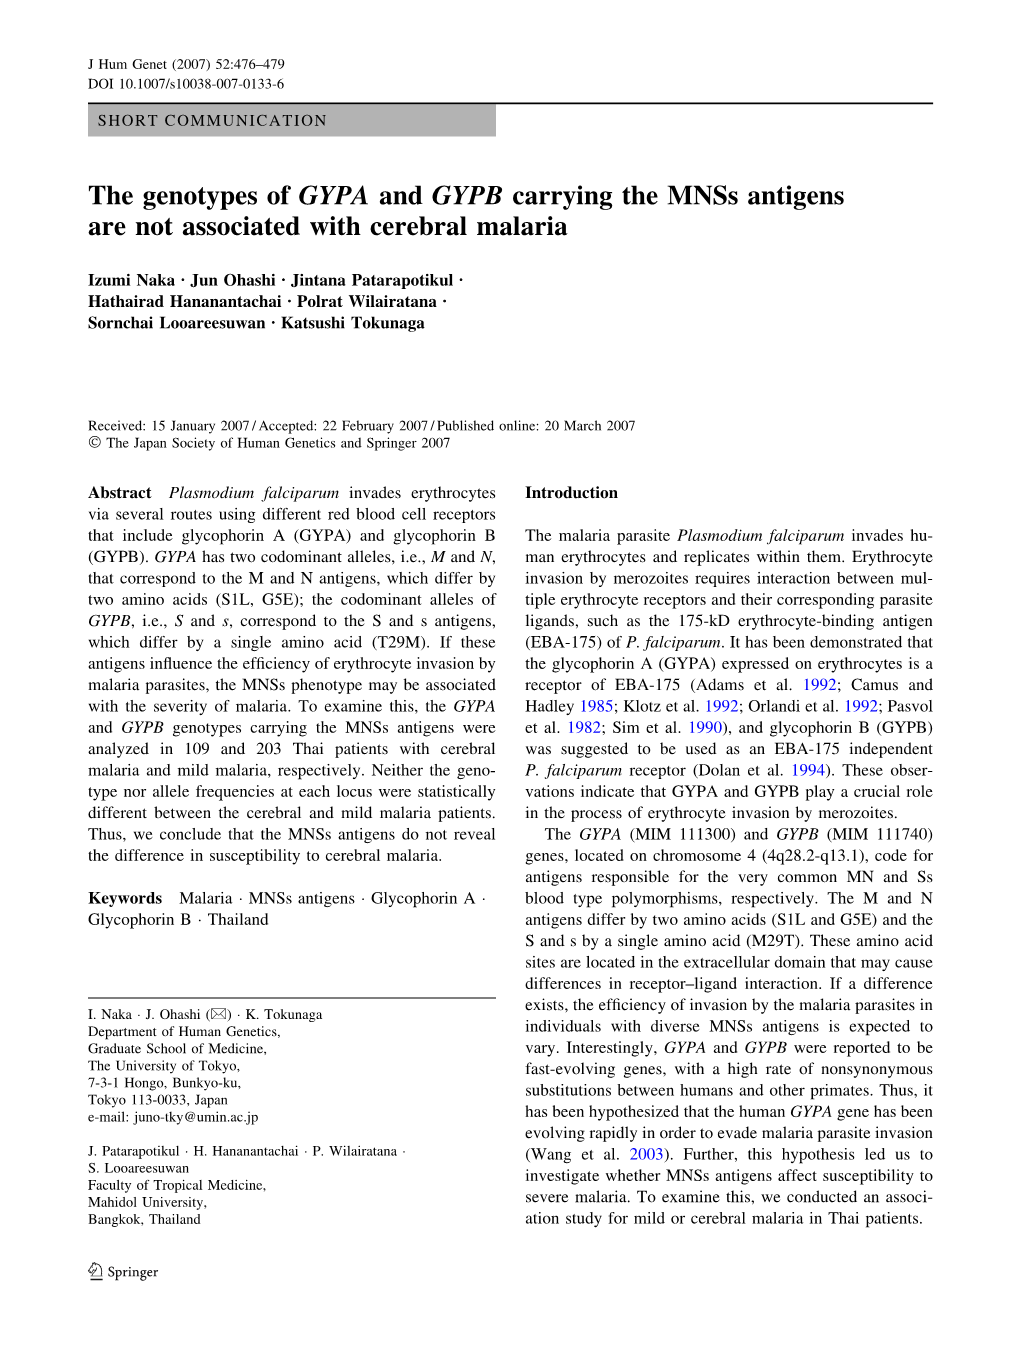 The Genotypes of GYPA and GYPB Carrying the Mnss Antigens Are Not Associated with Cerebral Malaria